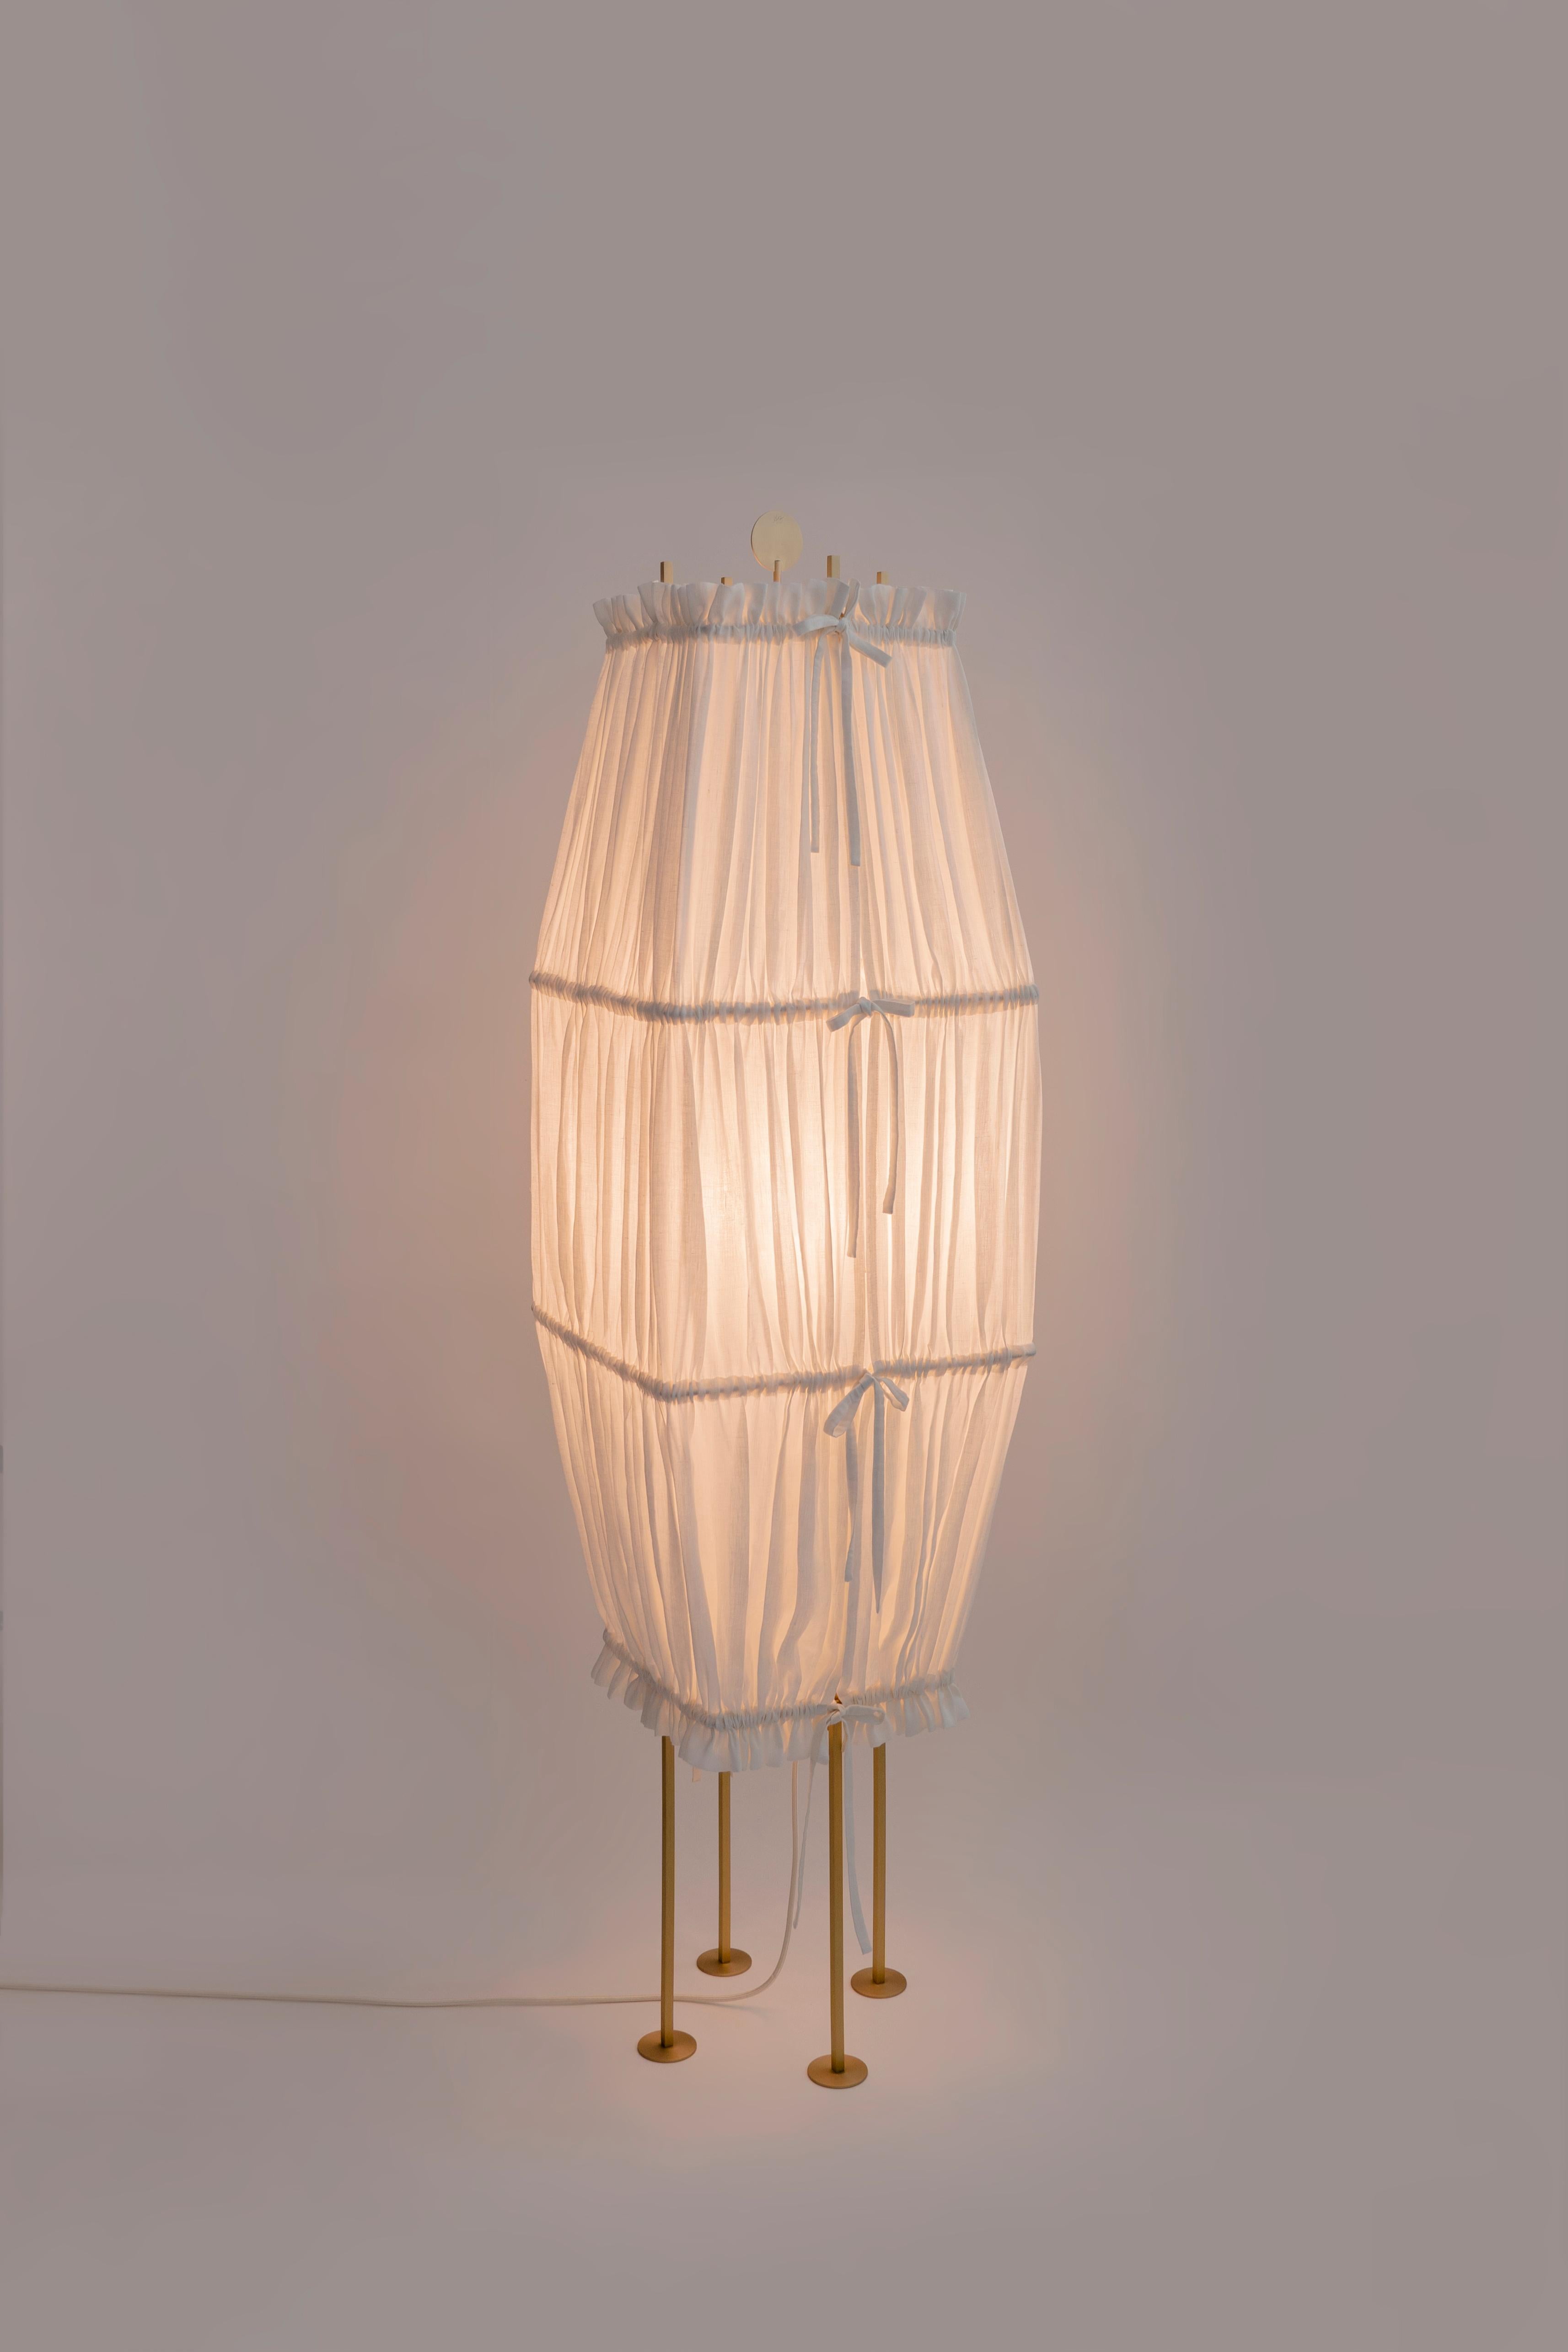 Other Large Presenza Floor Lamp by Agustina Bottoni